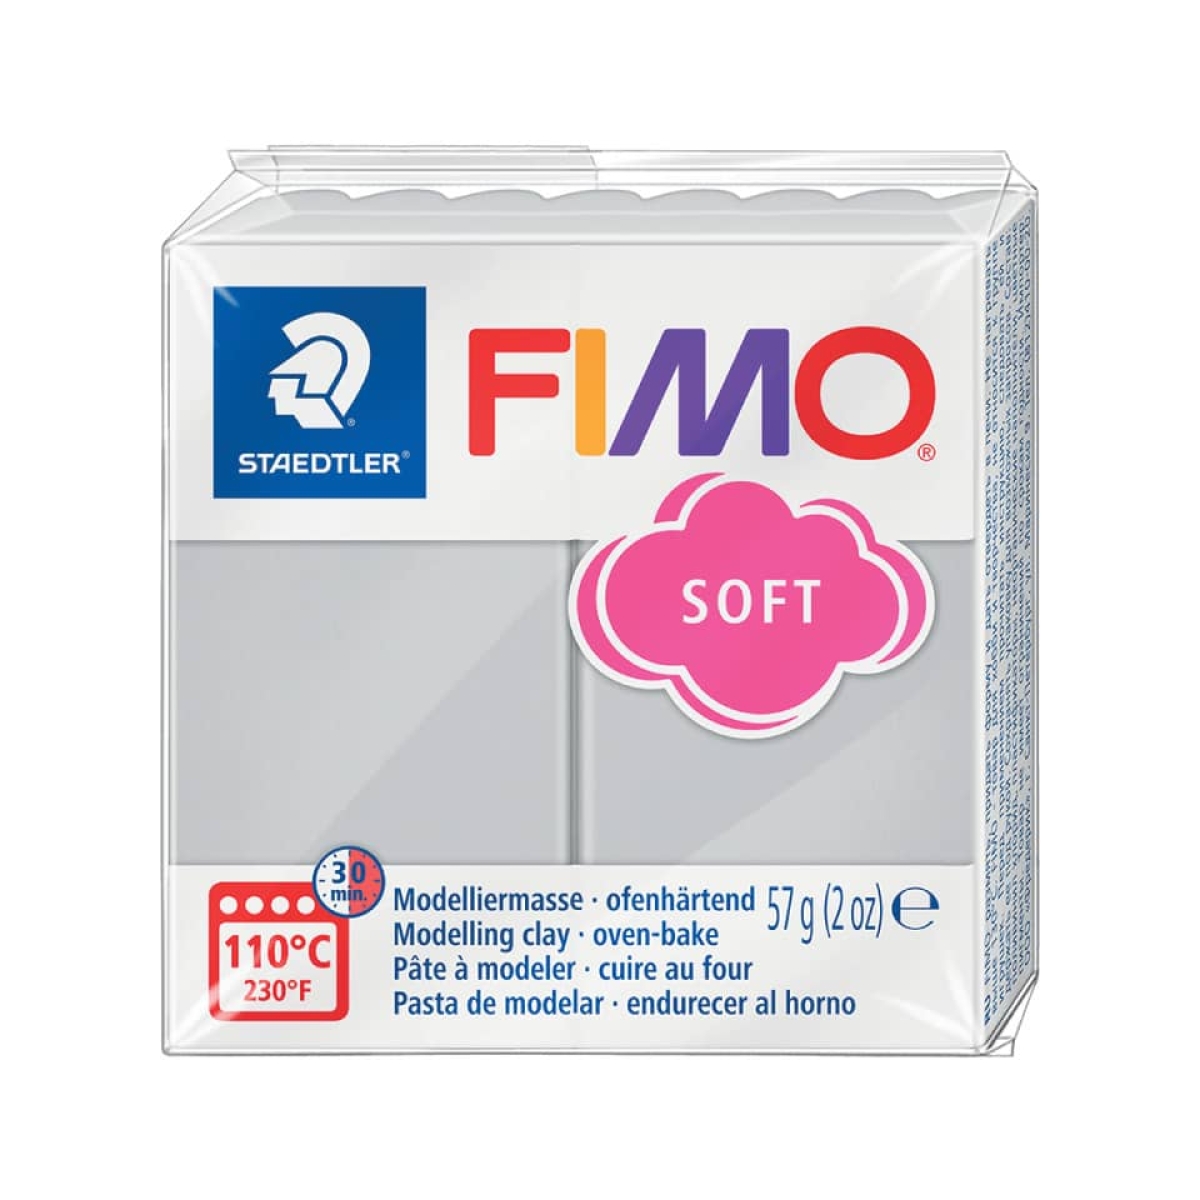 STAEDTLERModeling clay FIMO® soft, 57 g, dolphin grey 8020-80-Price for 0.0570 kgArticle-No: 4006608809874